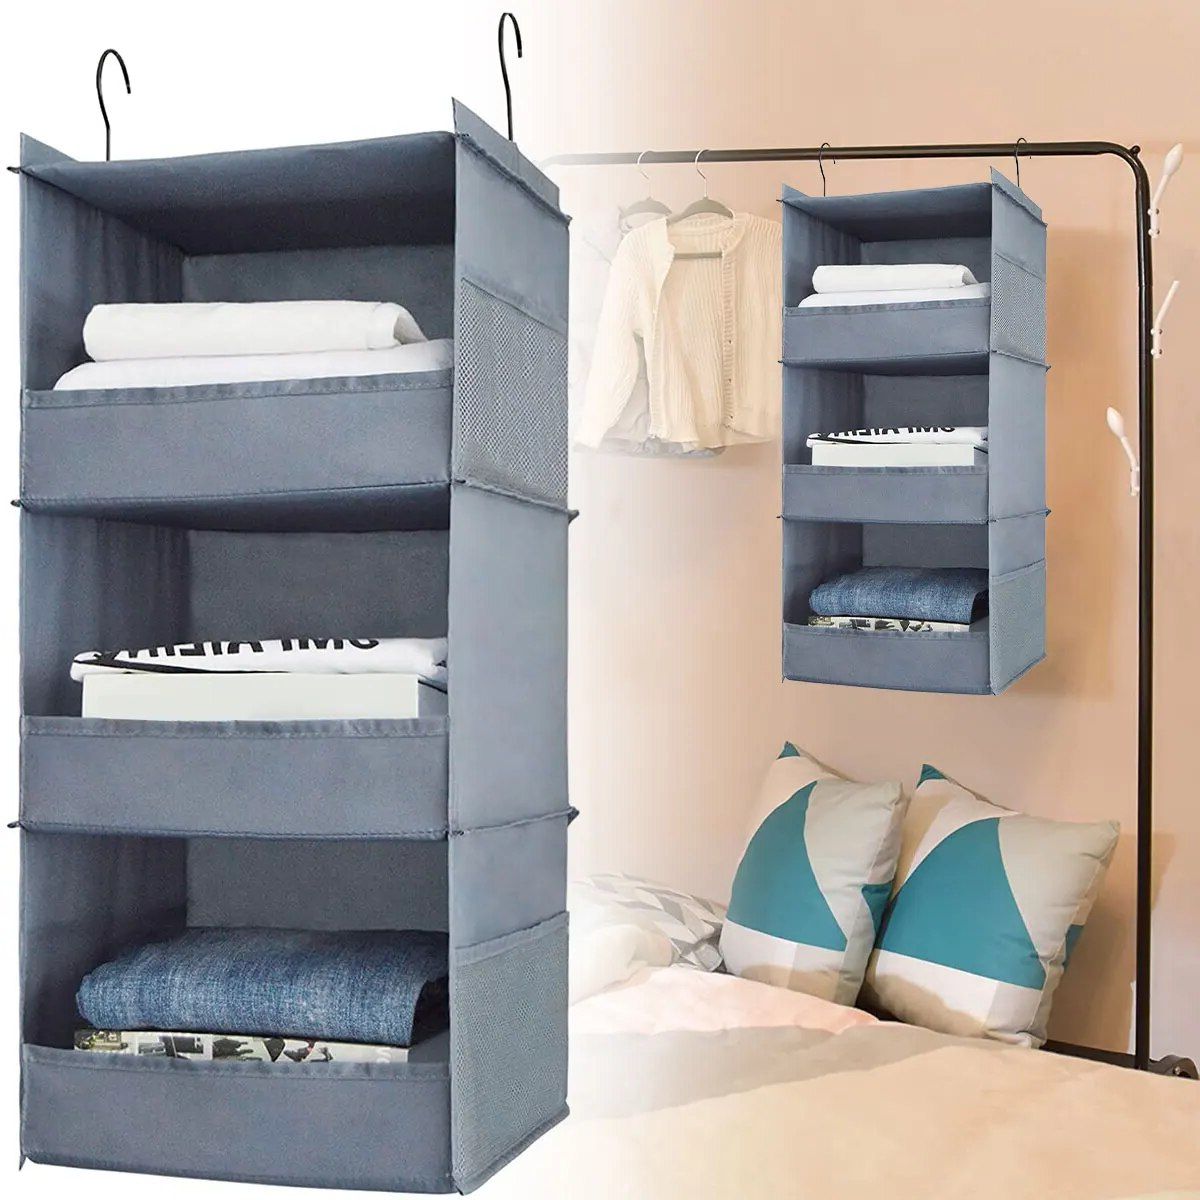 3/4 Tier Hanging Wardrobe Organizer Collapsible Closet Hanging Shelves With  Side Pocket Sturdy Durable Hanging Closet Organizers – Aliexpress Within 3 Shelf Hanging Shelves Wardrobes (View 14 of 20)